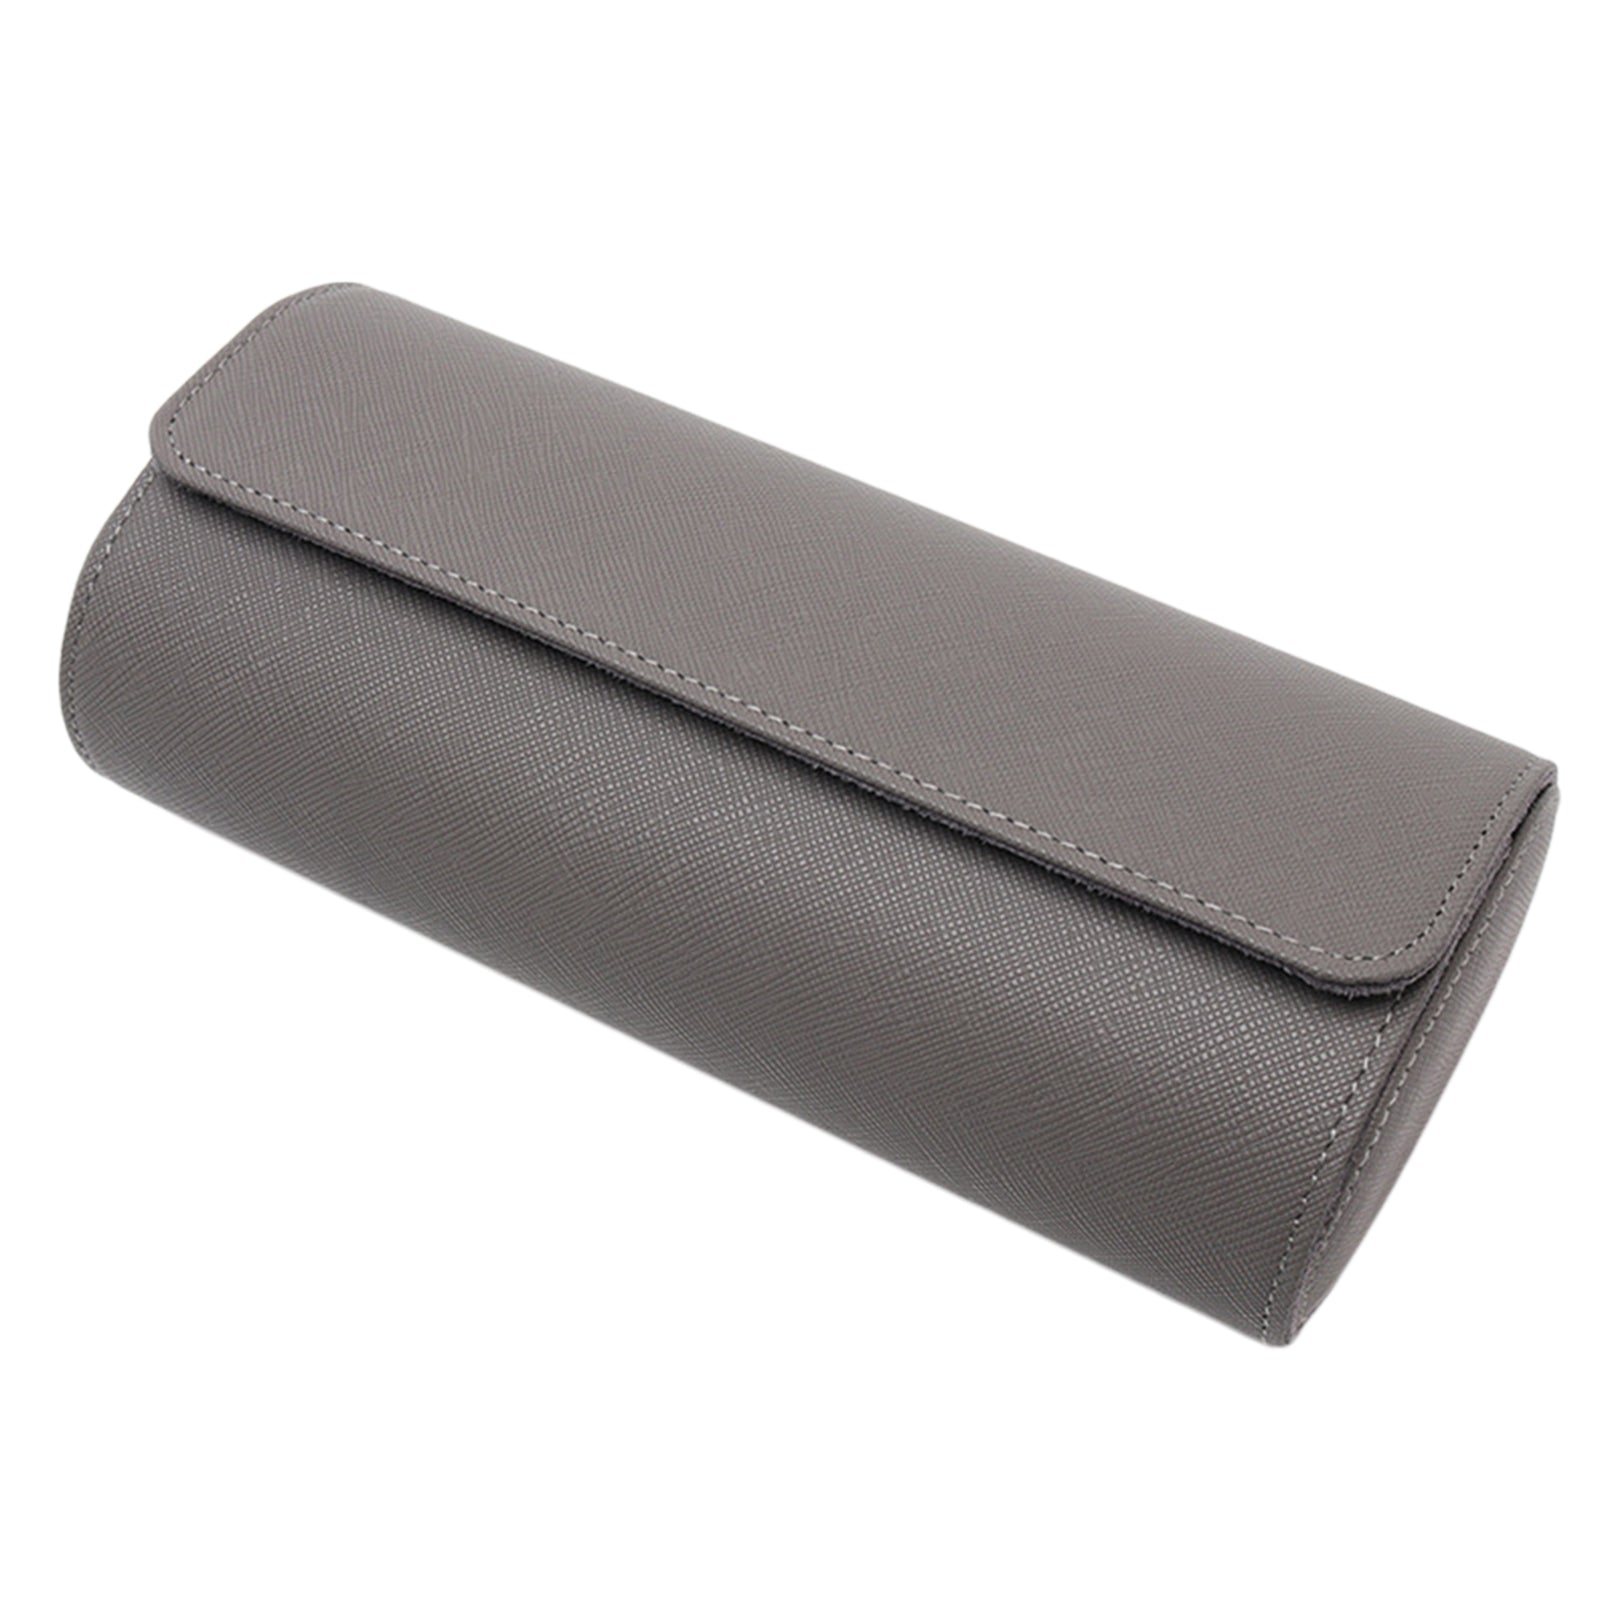 ,3 Slots PU Leather Case Organizer for Storage and Display Leather Travel Gray